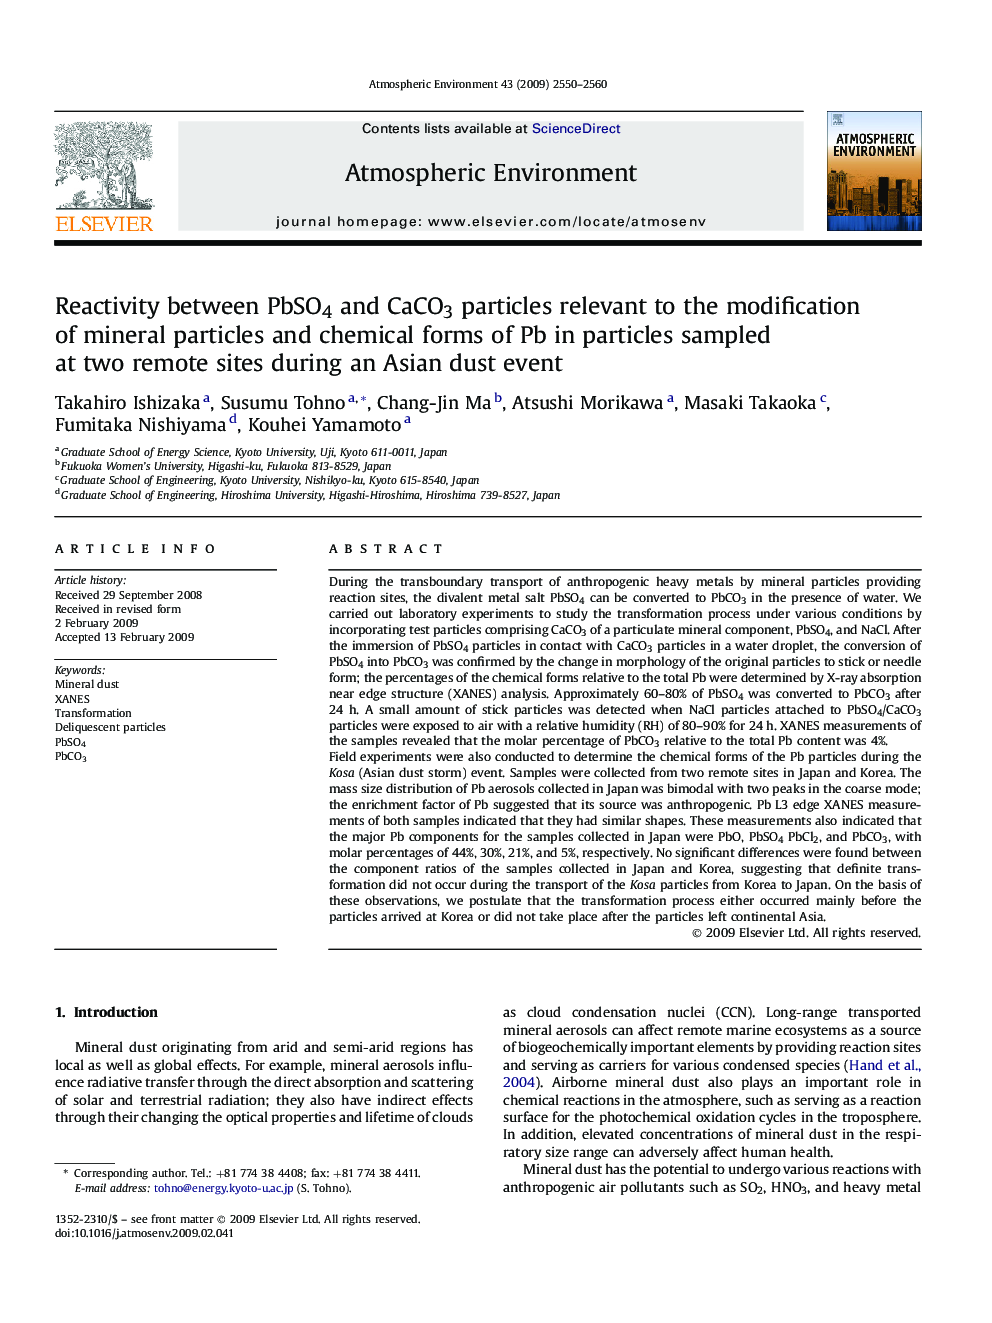 Reactivity between PbSO4 and CaCO3 particles relevant to the modification of mineral particles and chemical forms of Pb in particles sampled at two remote sites during an Asian dust event